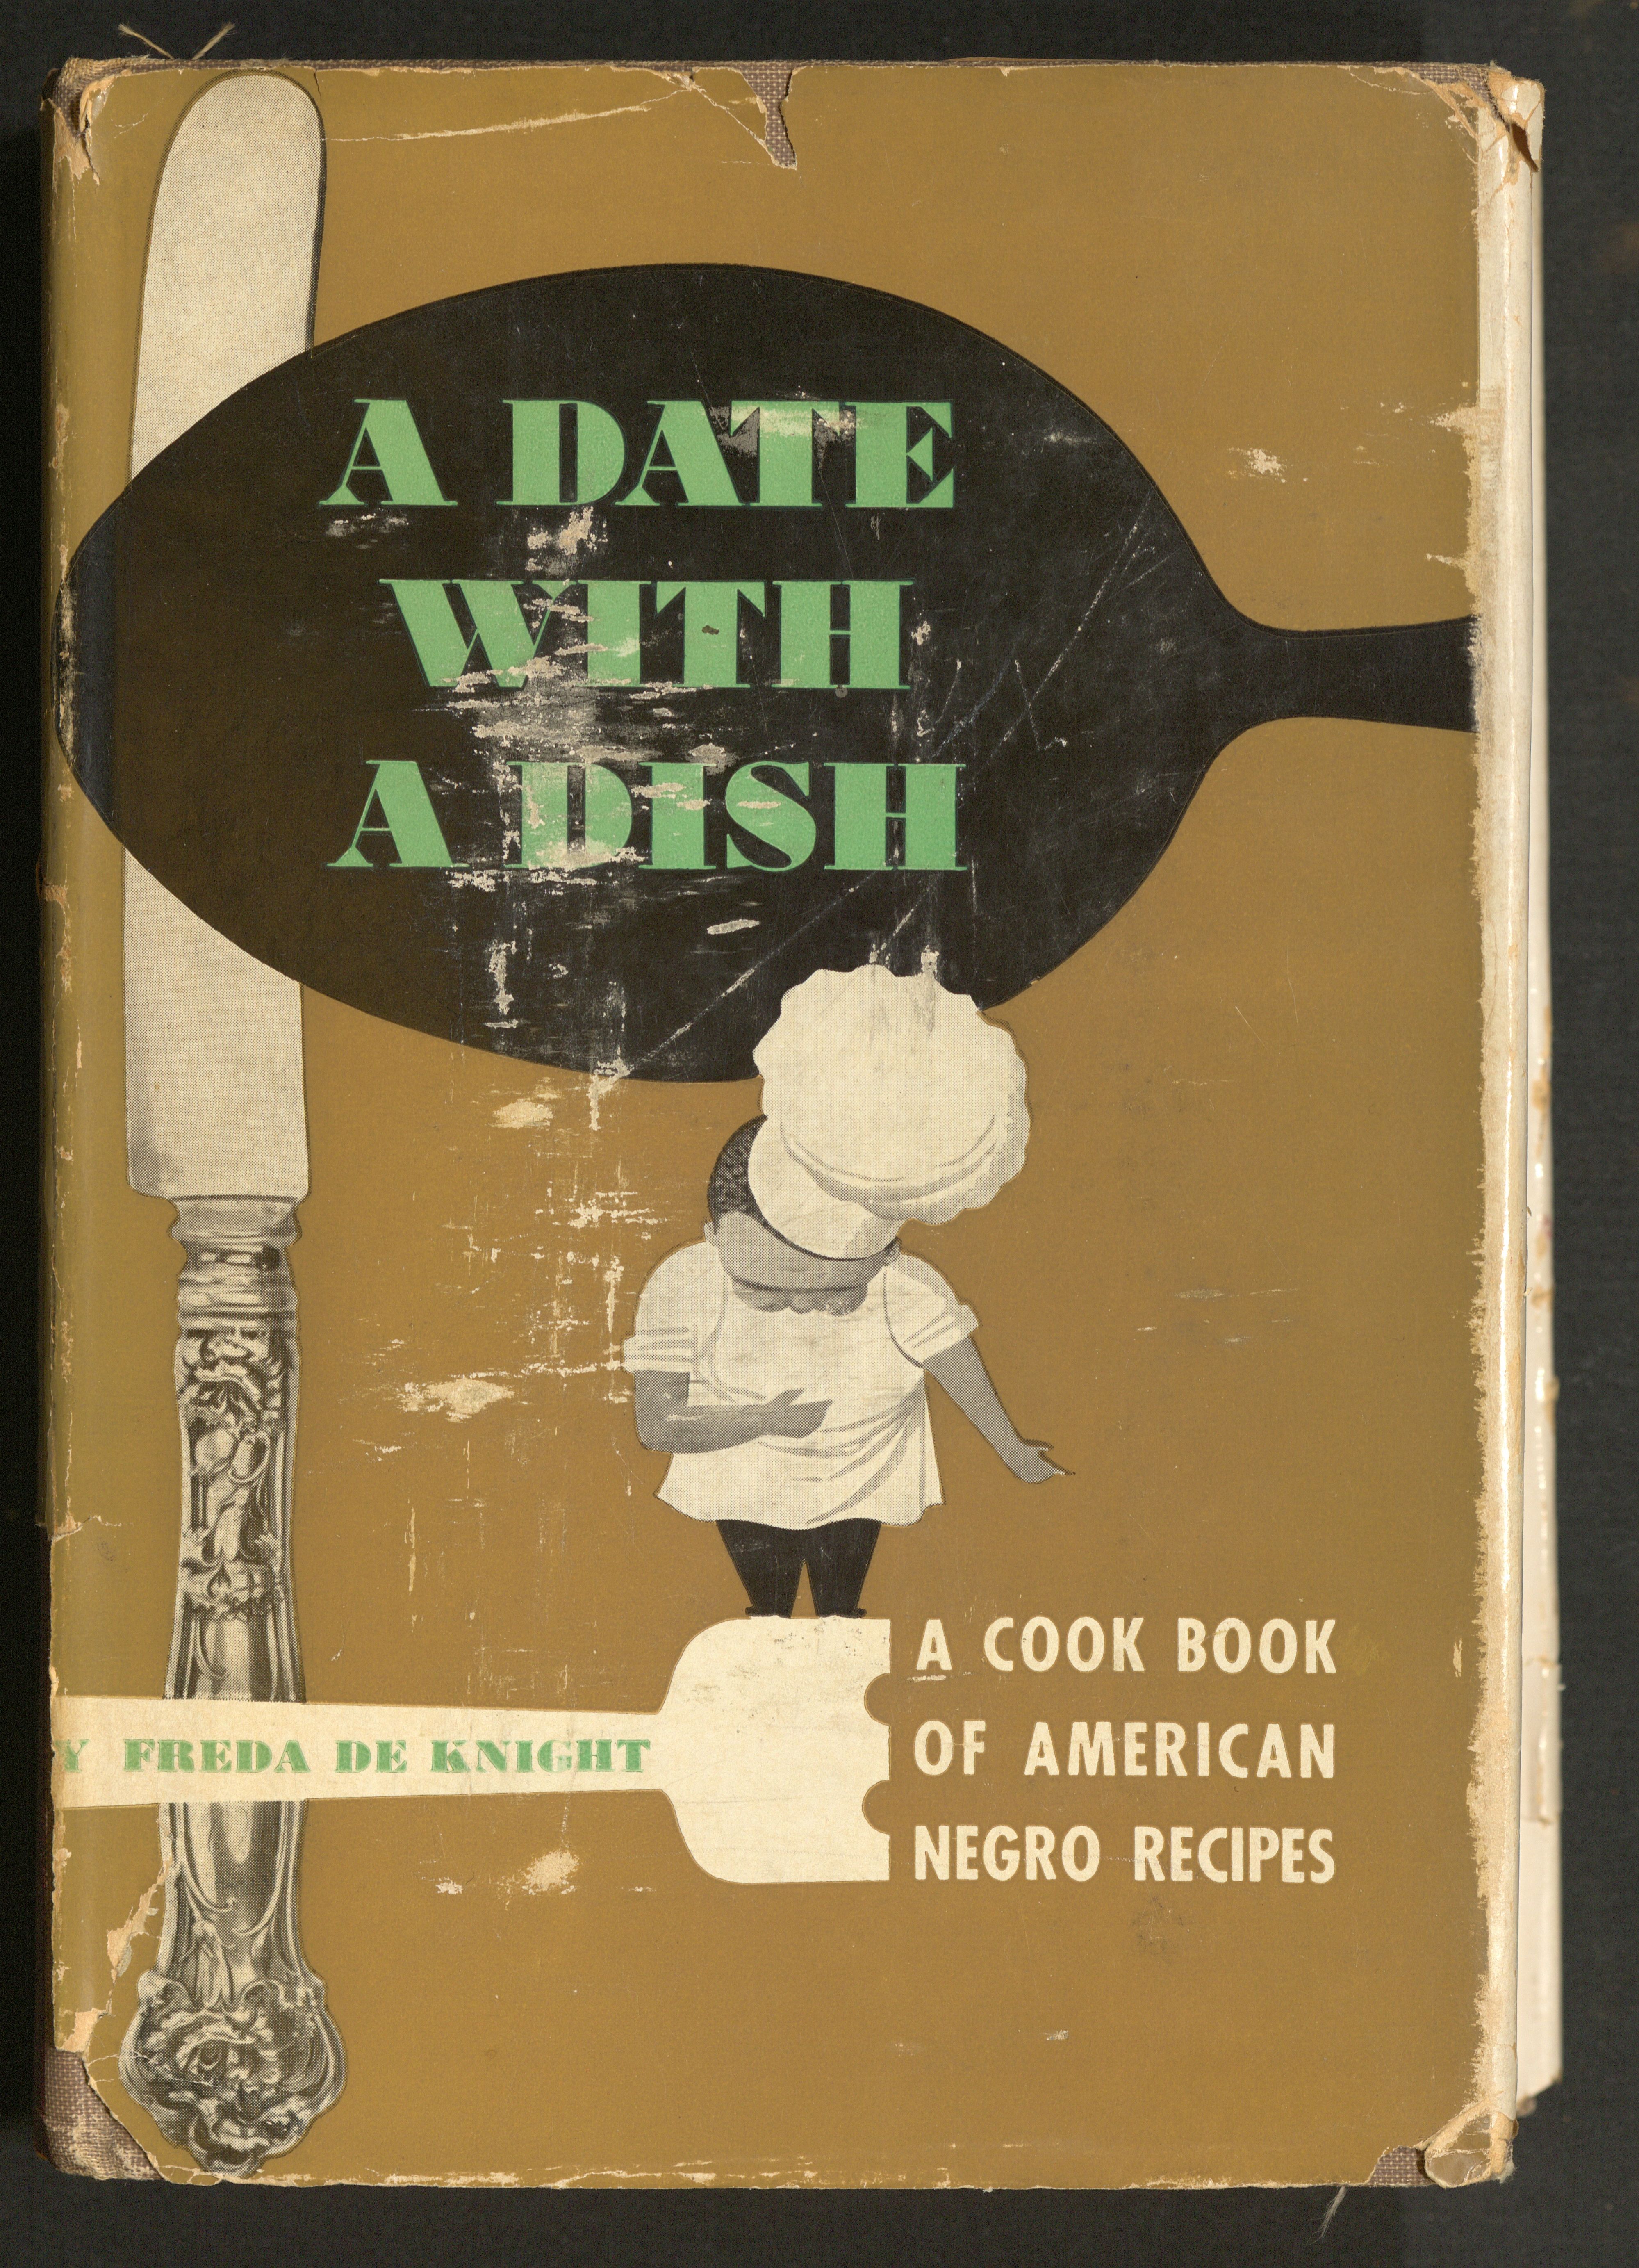 Dustjacket with book title "A Date with a Dish" in vibrant green print over the silhouette of an oversize black spoon, with a small figure in a chef's hat bowing towards the viewer below. 